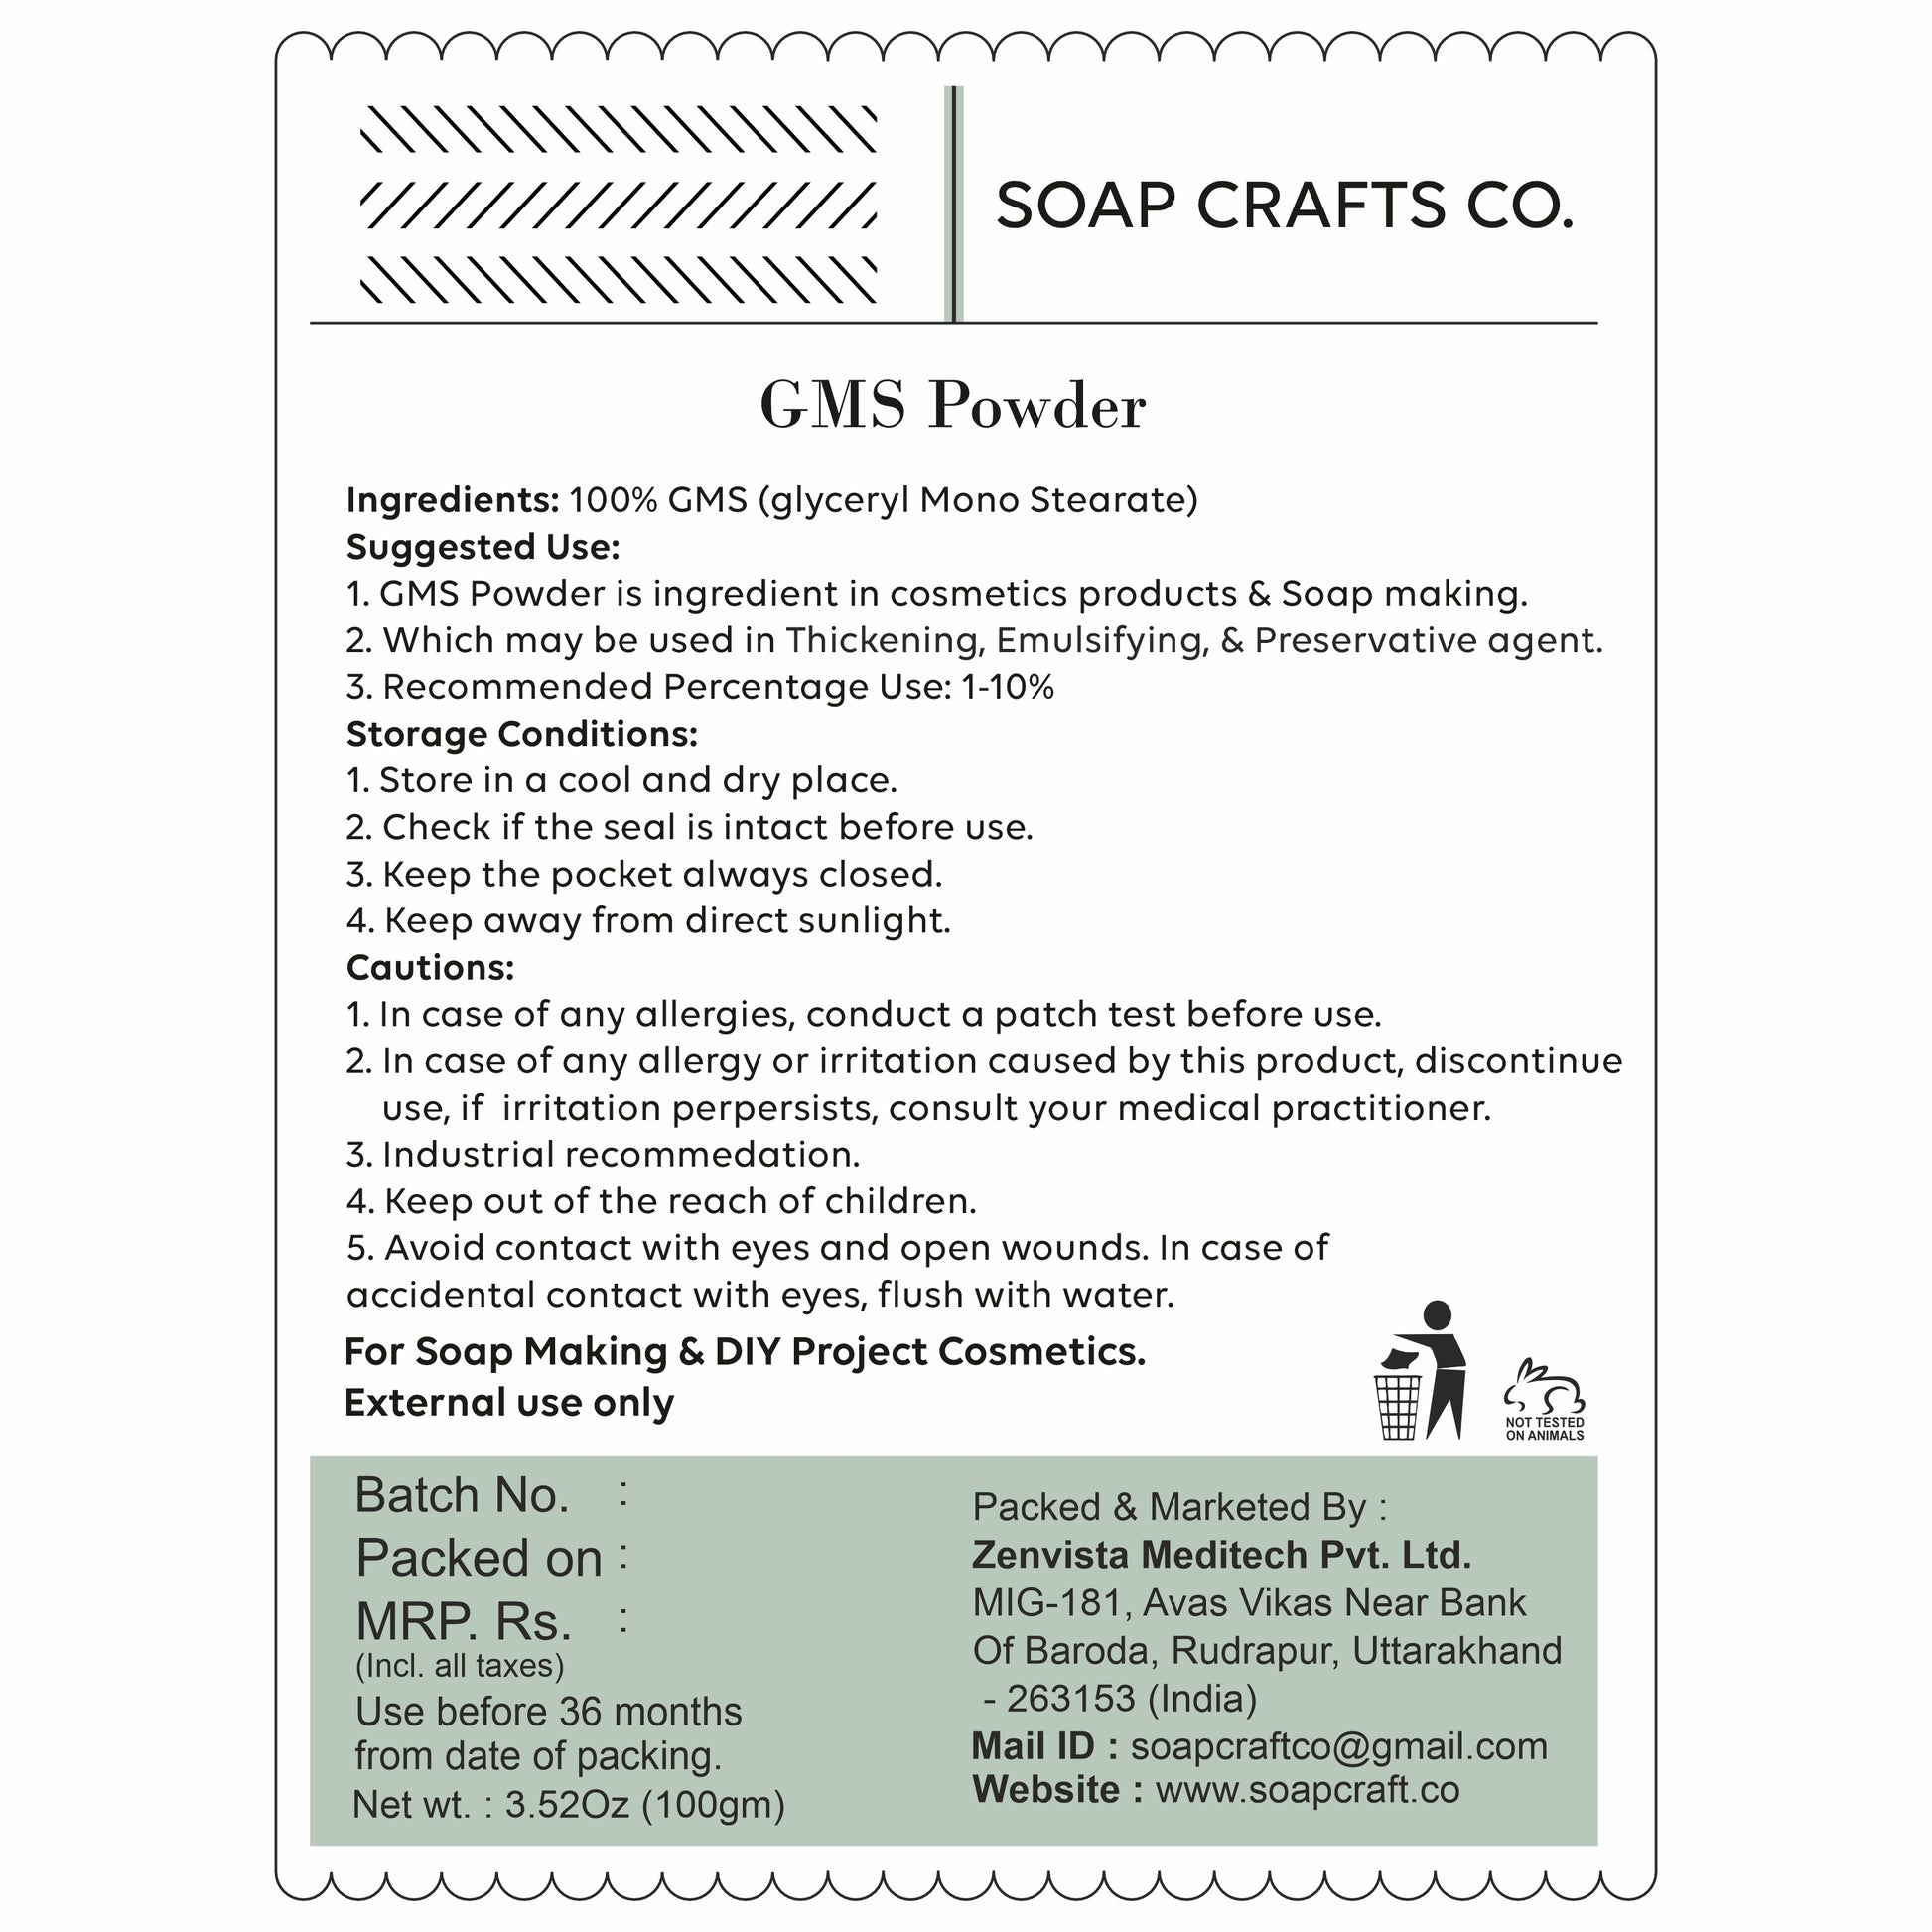 cosmeticmaking, saopmaking, cosmeticmakingingredients, soapmakingingredients,cosmeticingredients,naturalingredients,organicingredients,veganingredients, essentialoils,fragranceoils,carrieroils, carrieroils, butters, clays,botanicals,herbs,preservatives,emulsifiers,surfa ctants,thickeners, thickeners,exfoliants,GMS